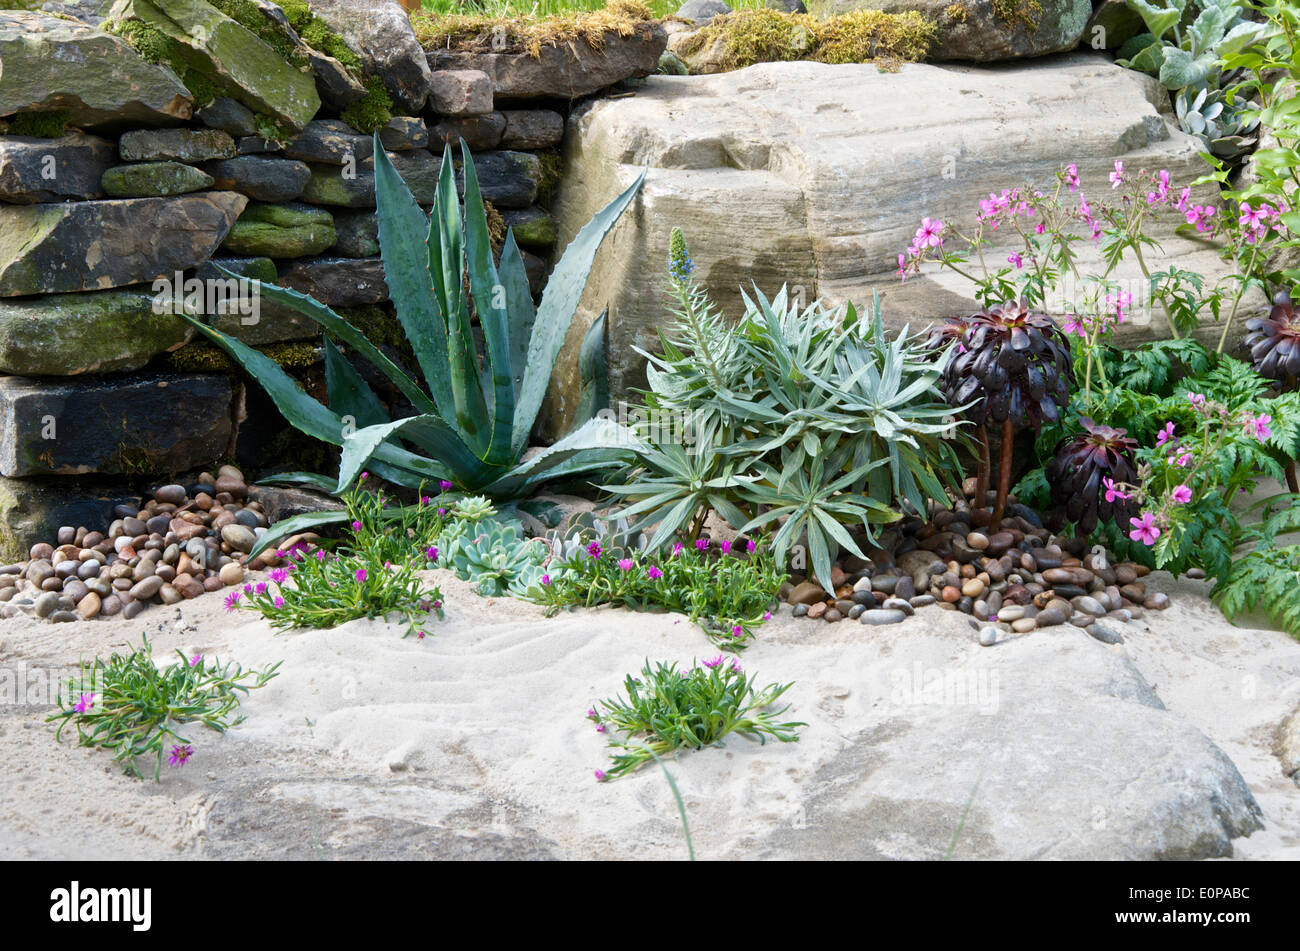 A detail of the coastal planting in the garden designed by Alan ...